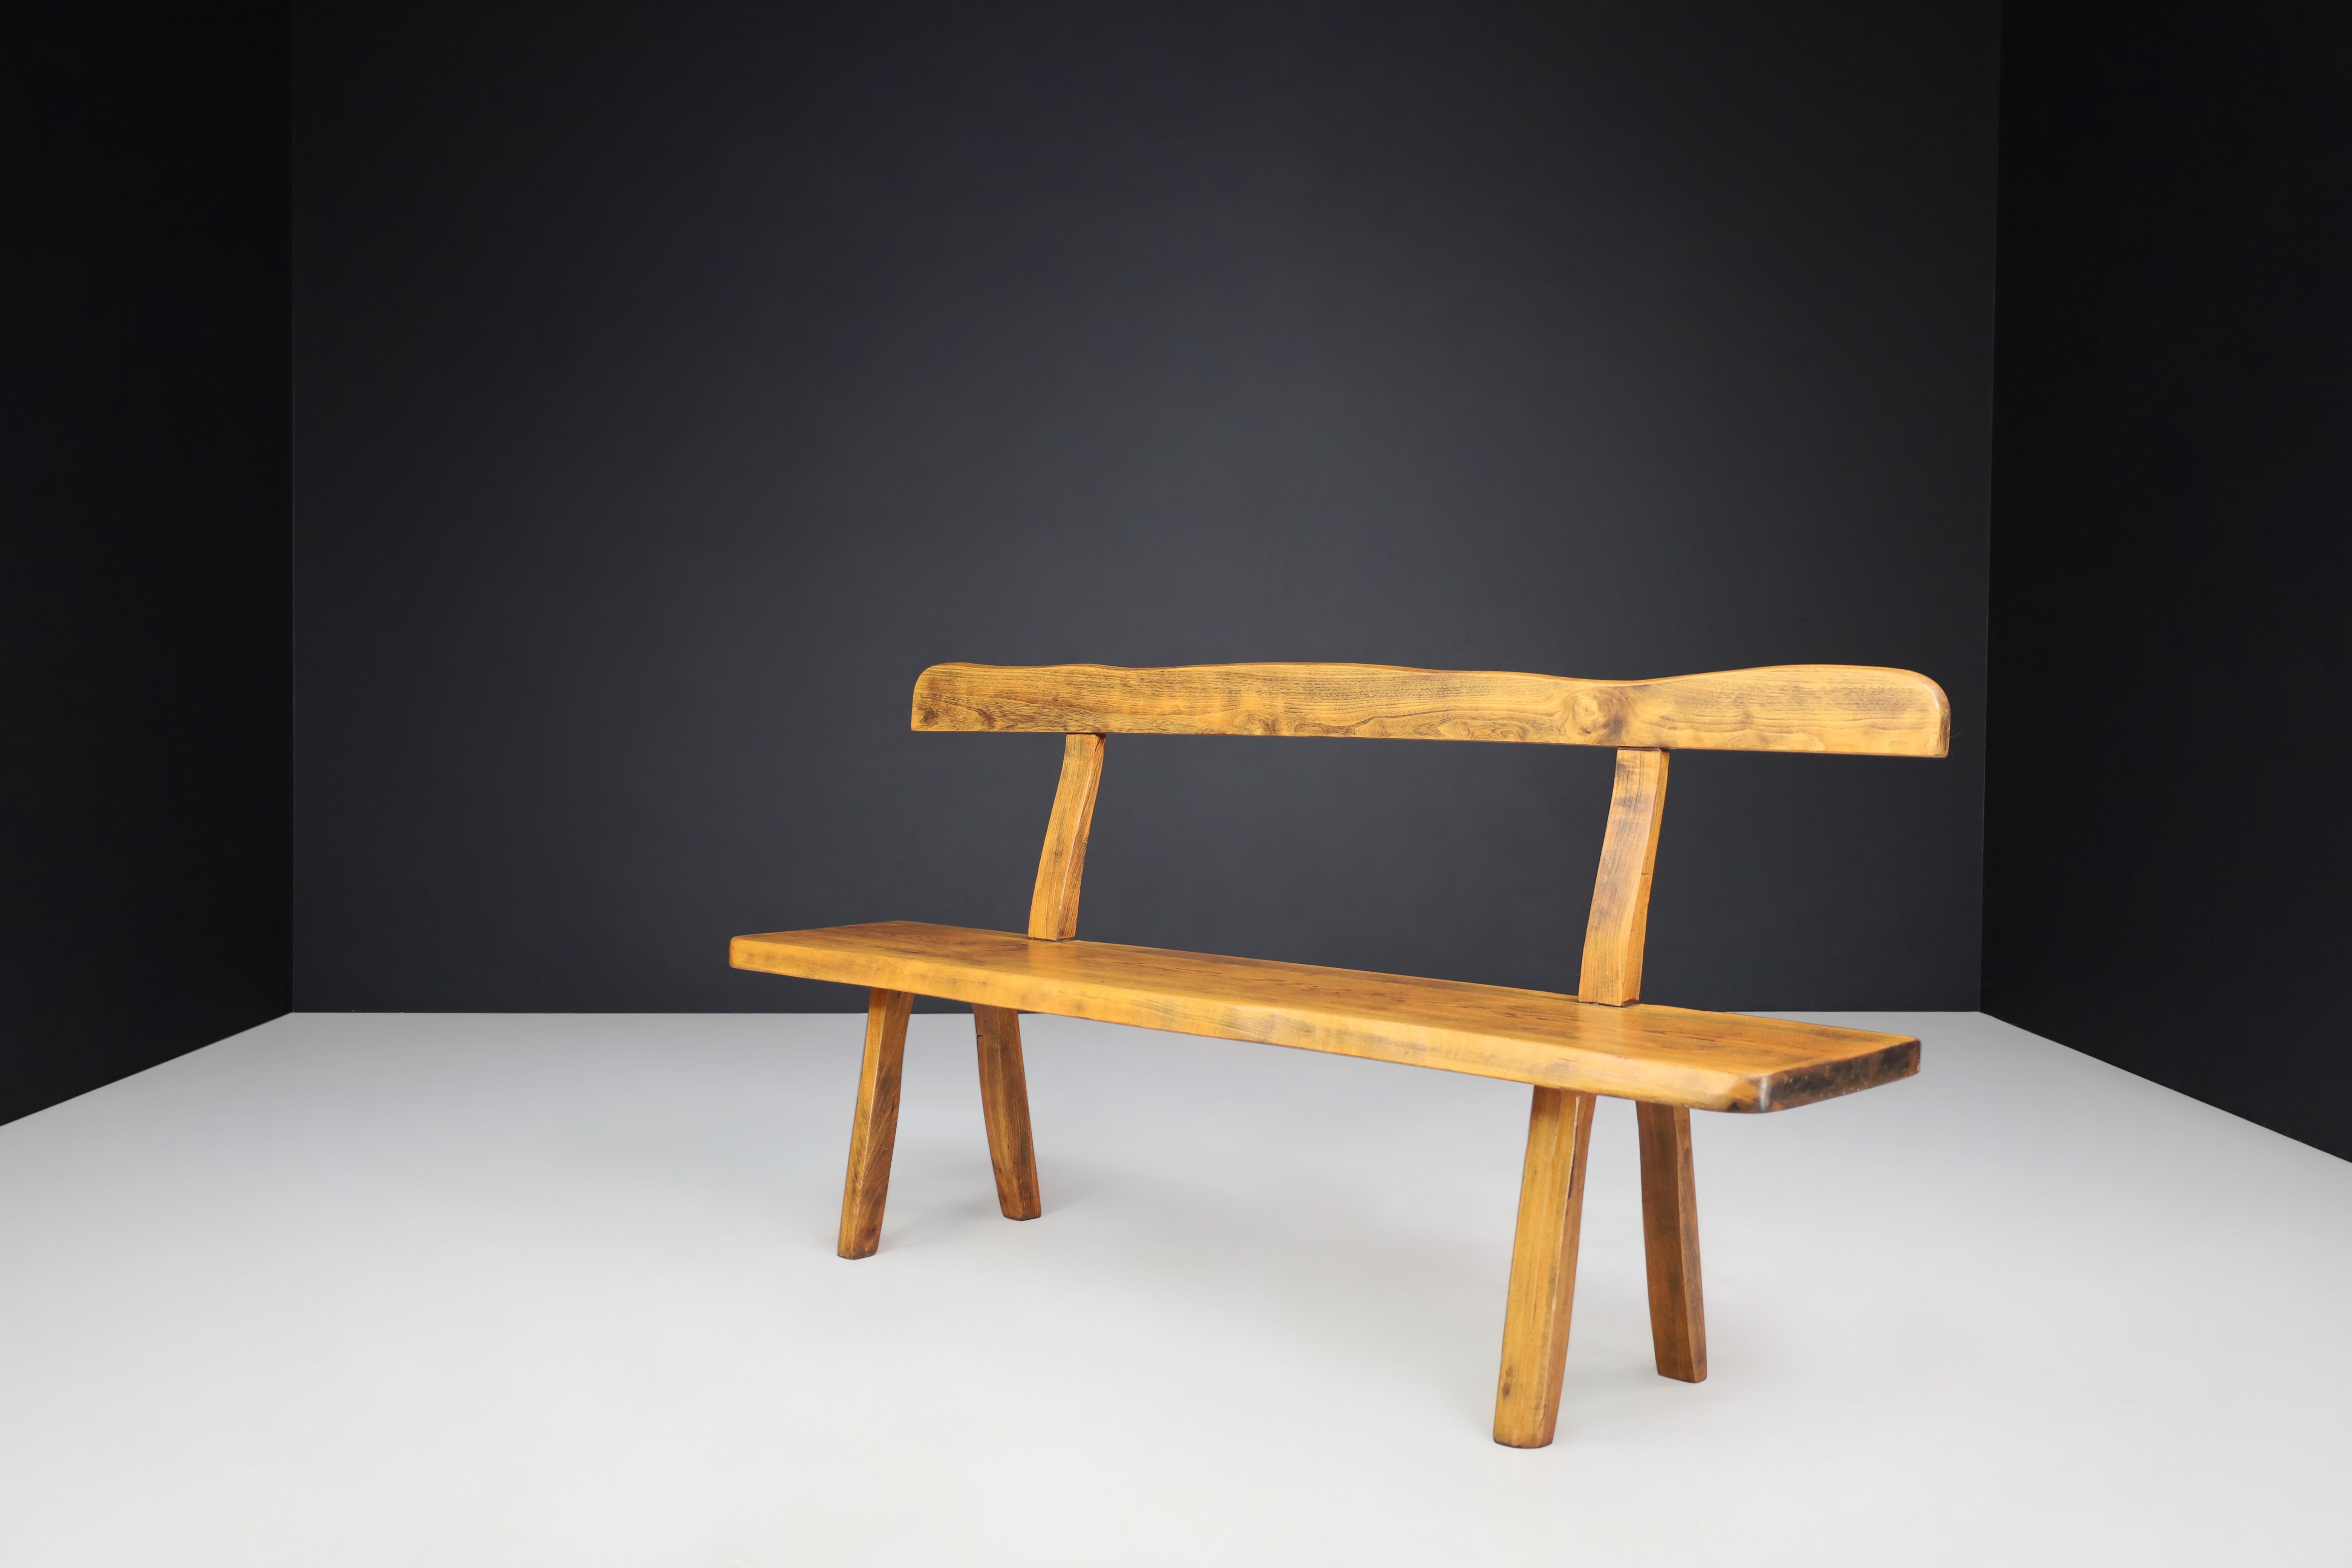 Olavi Hänninen for Mikko Nupponen sculptural bench, Finland, 1950s.

This sculptural bench is a beautiful piece of midcentury design, crafted by hand from stained elmwood by Olavi Hanninen and manufactured by Mikko Nupponen in Finland in the